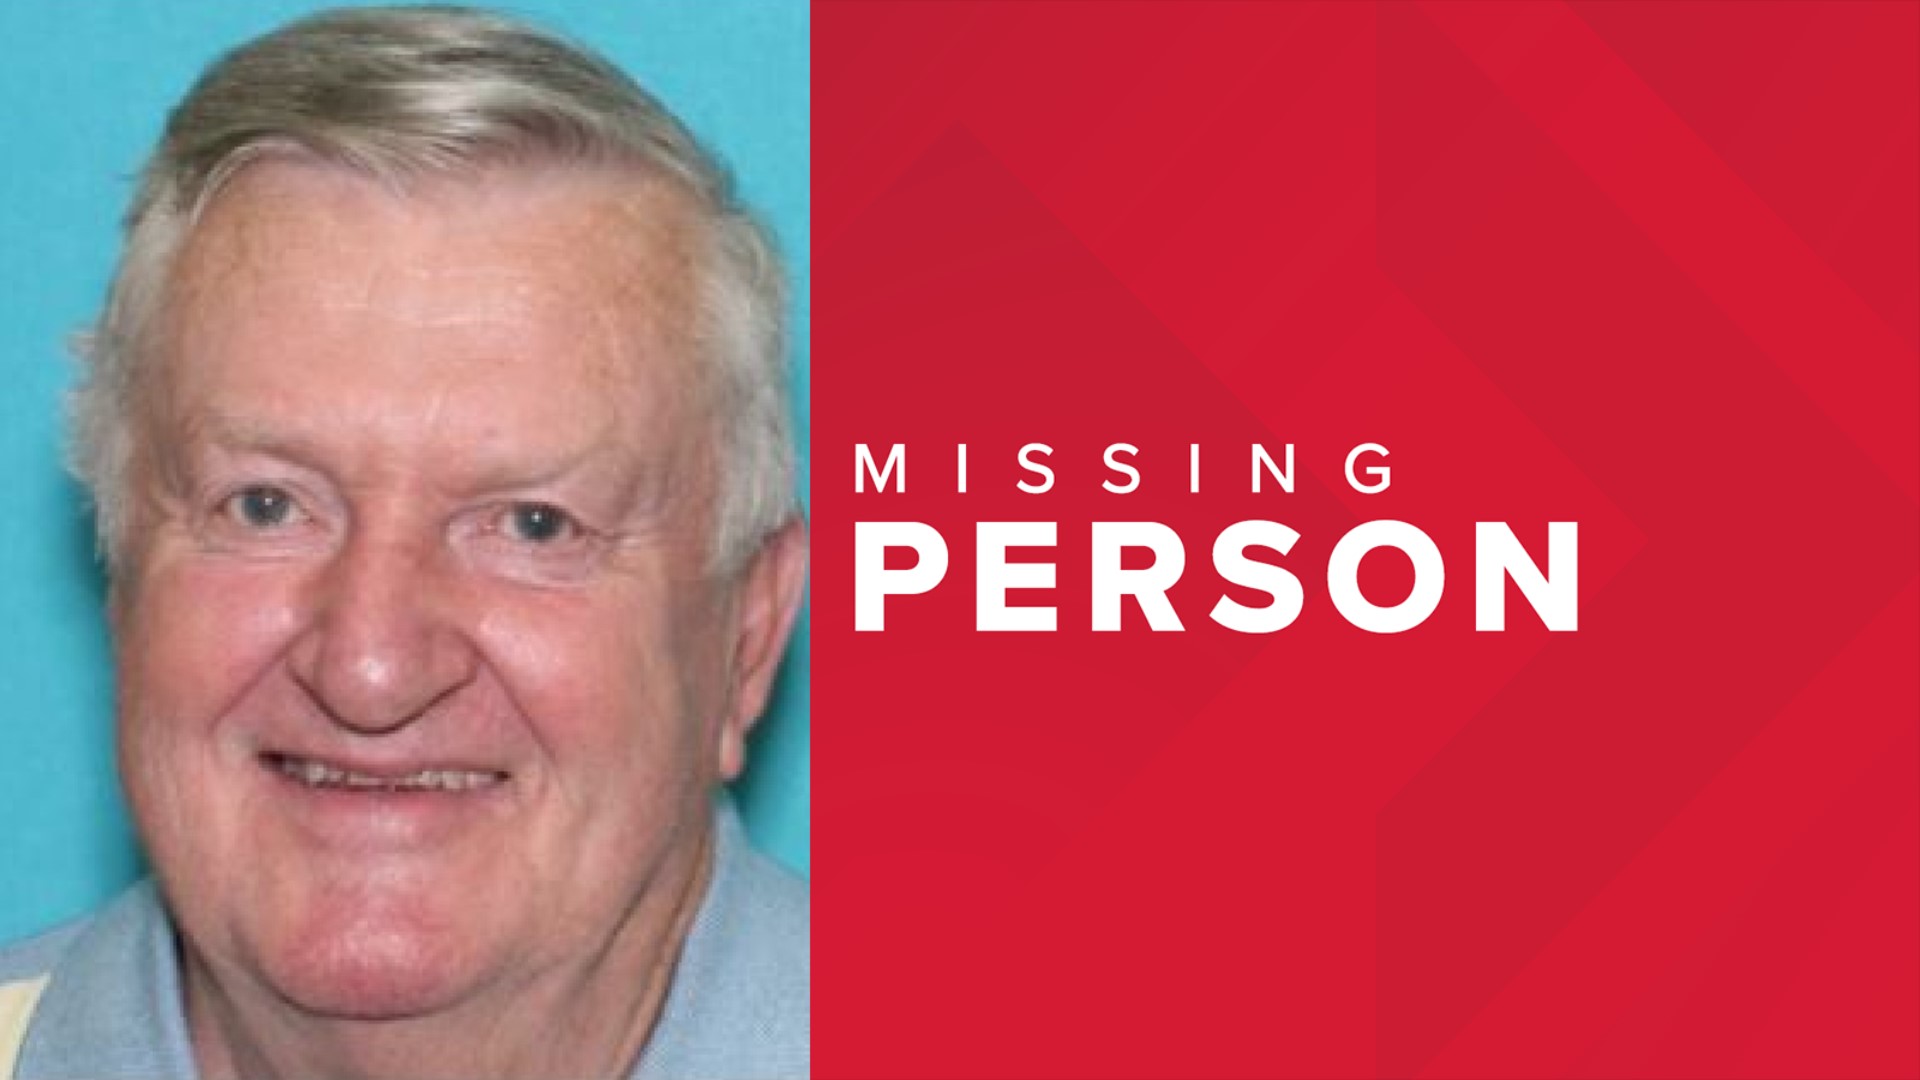 Norman Waterstradt, 76, has been missing since around 6:30 p.m. Tuesday.